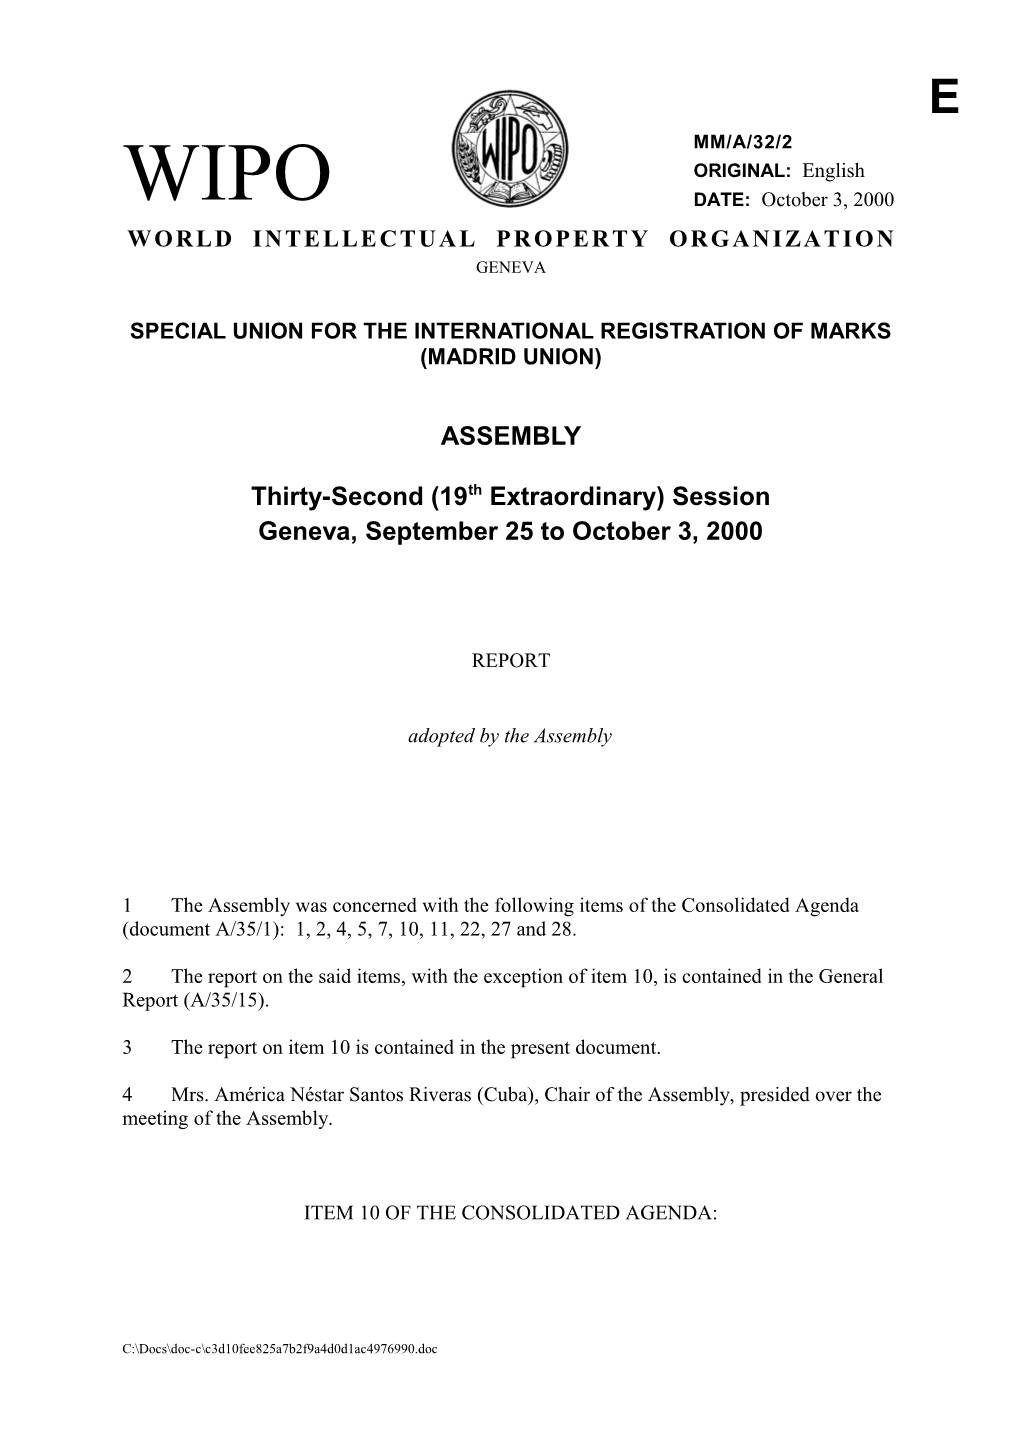 MM/A/32/2: Report (Adopted by the Assembly) (Annex 1)